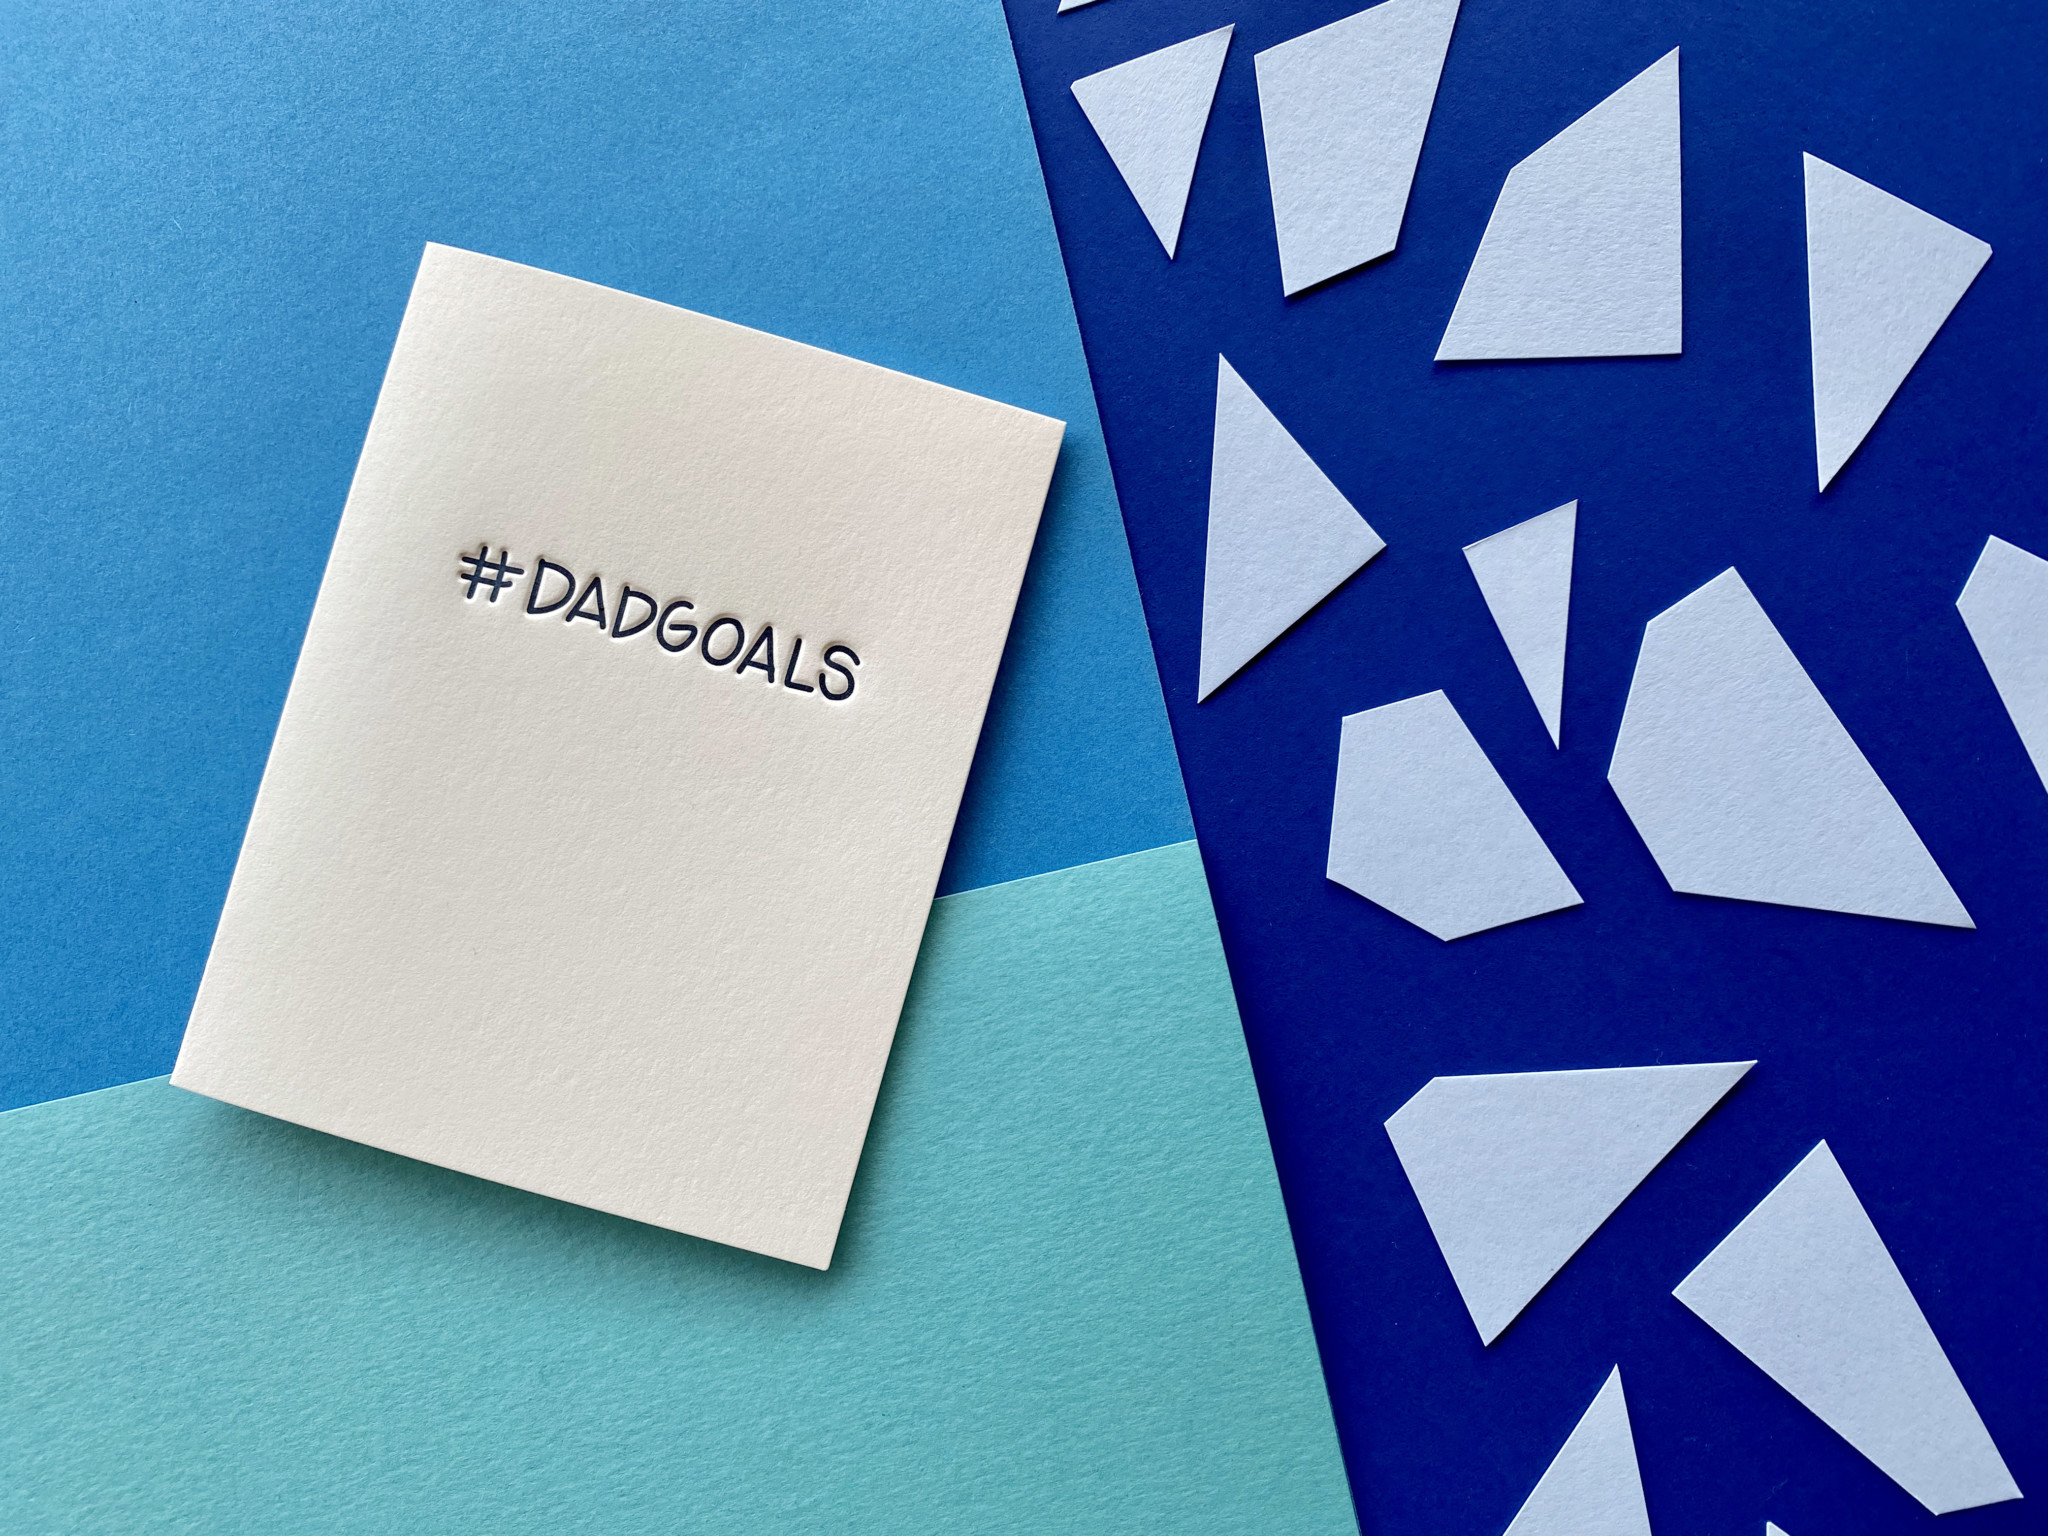 Hashtag dadgoals Greeting Card on layered paper background